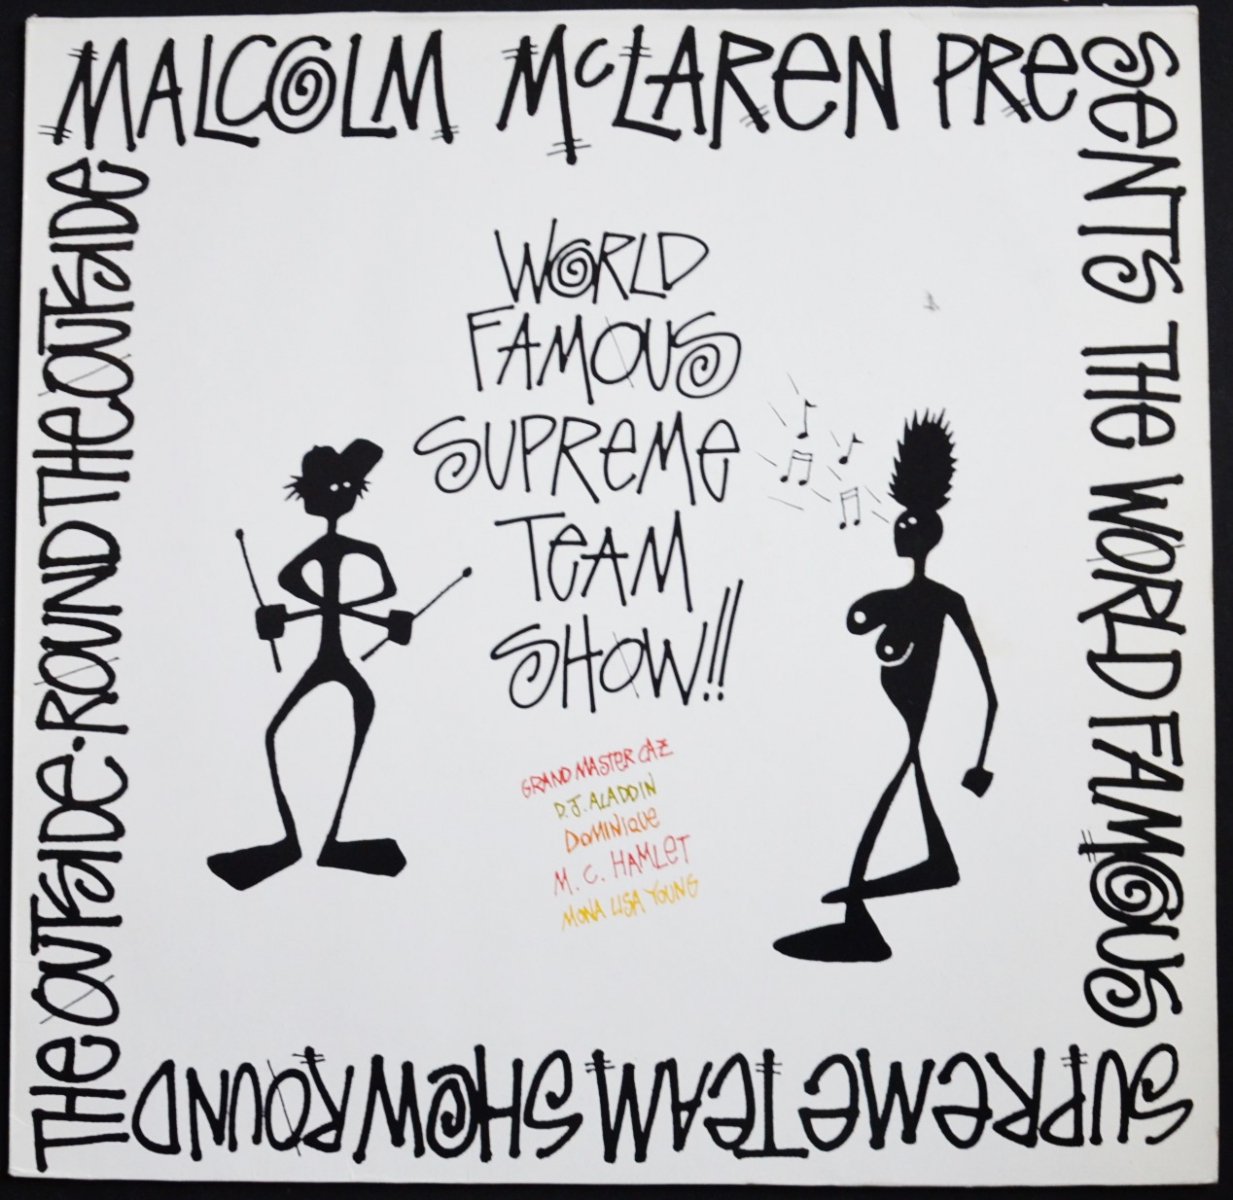 MALCOLM MCLAREN / THE WORLD FAMOUS SUPREME TEAM SHOW / ROUND THE OUTSIDE! ROUND THE OUTSIDE! (1LP)